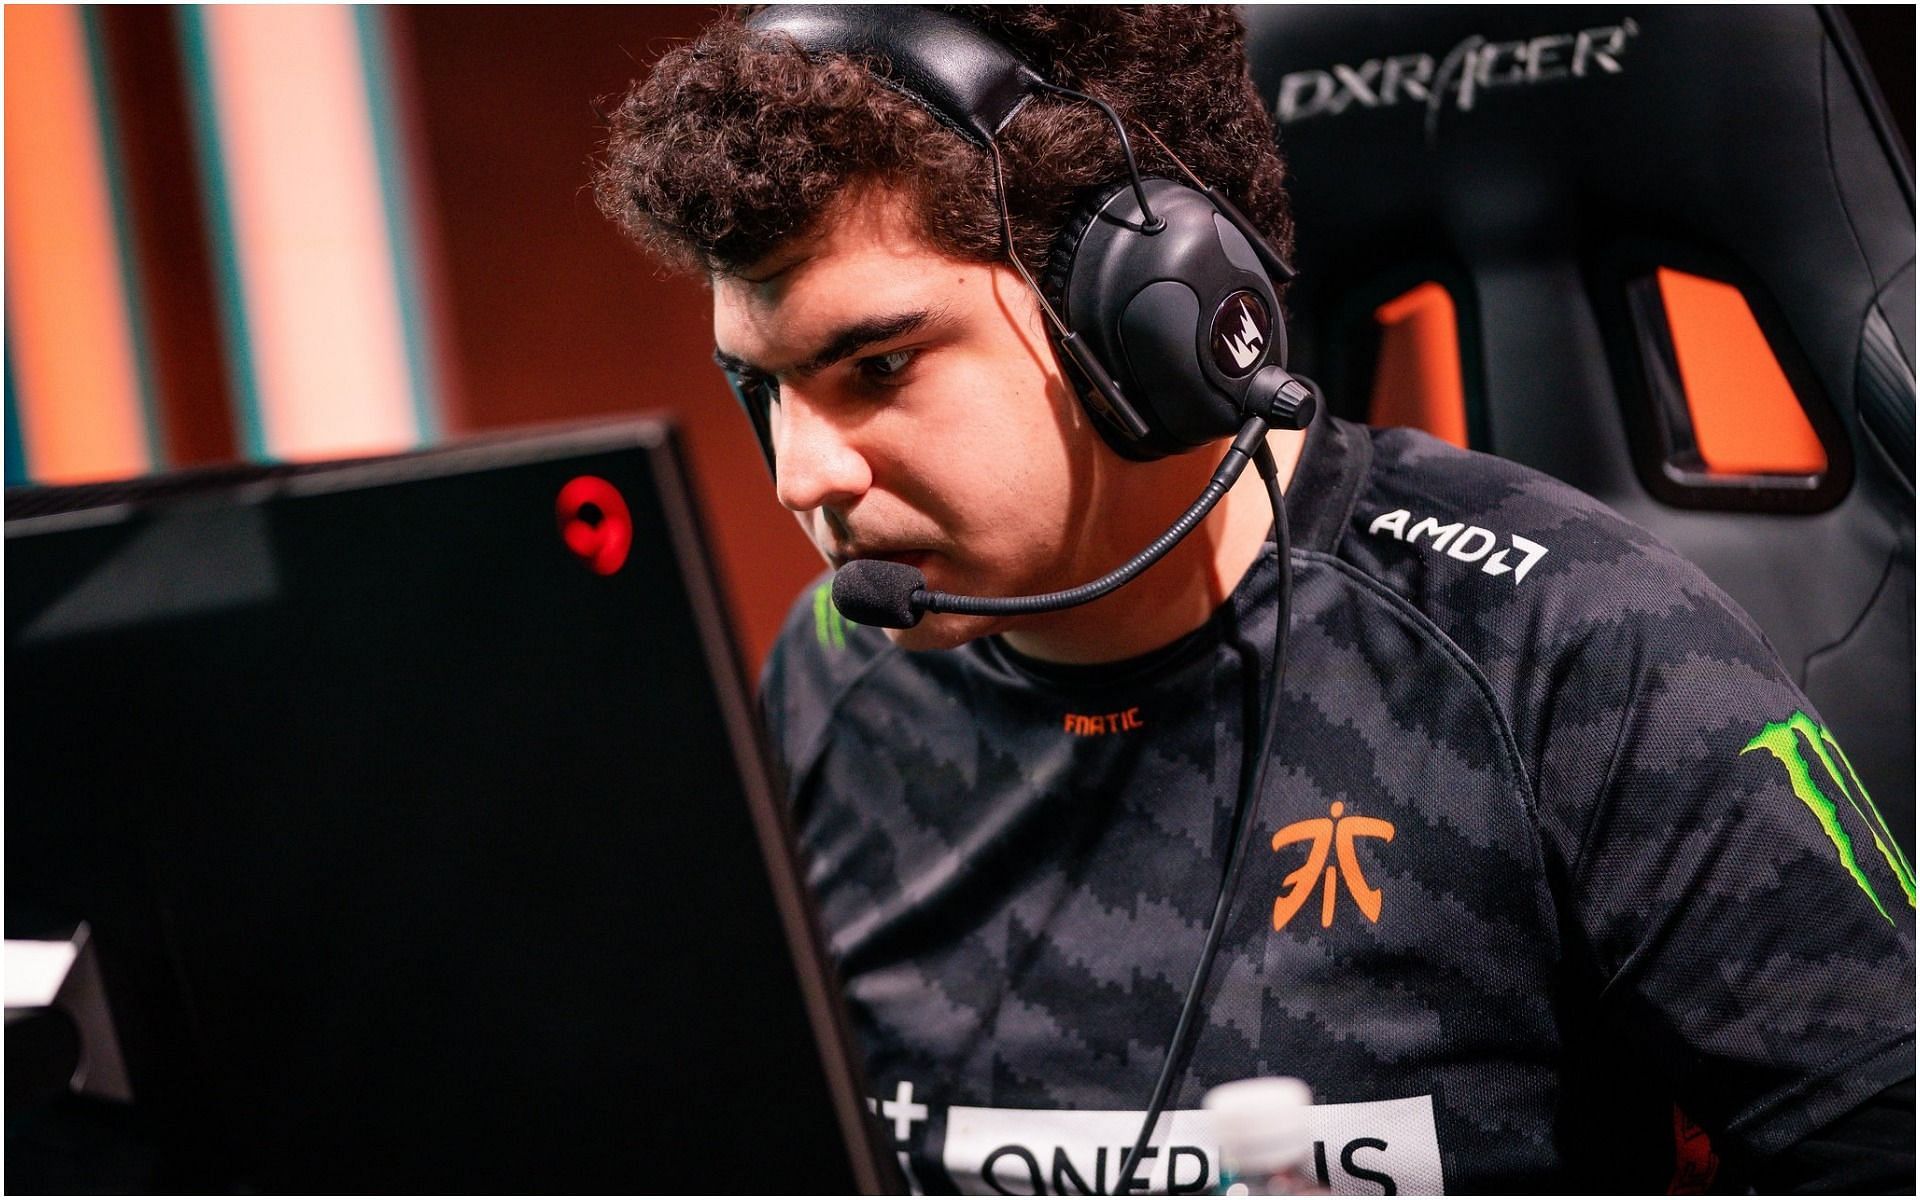 Bwipo had been suffering from personal issues leading to poor performance at the Worlds (Image via League of Legends)